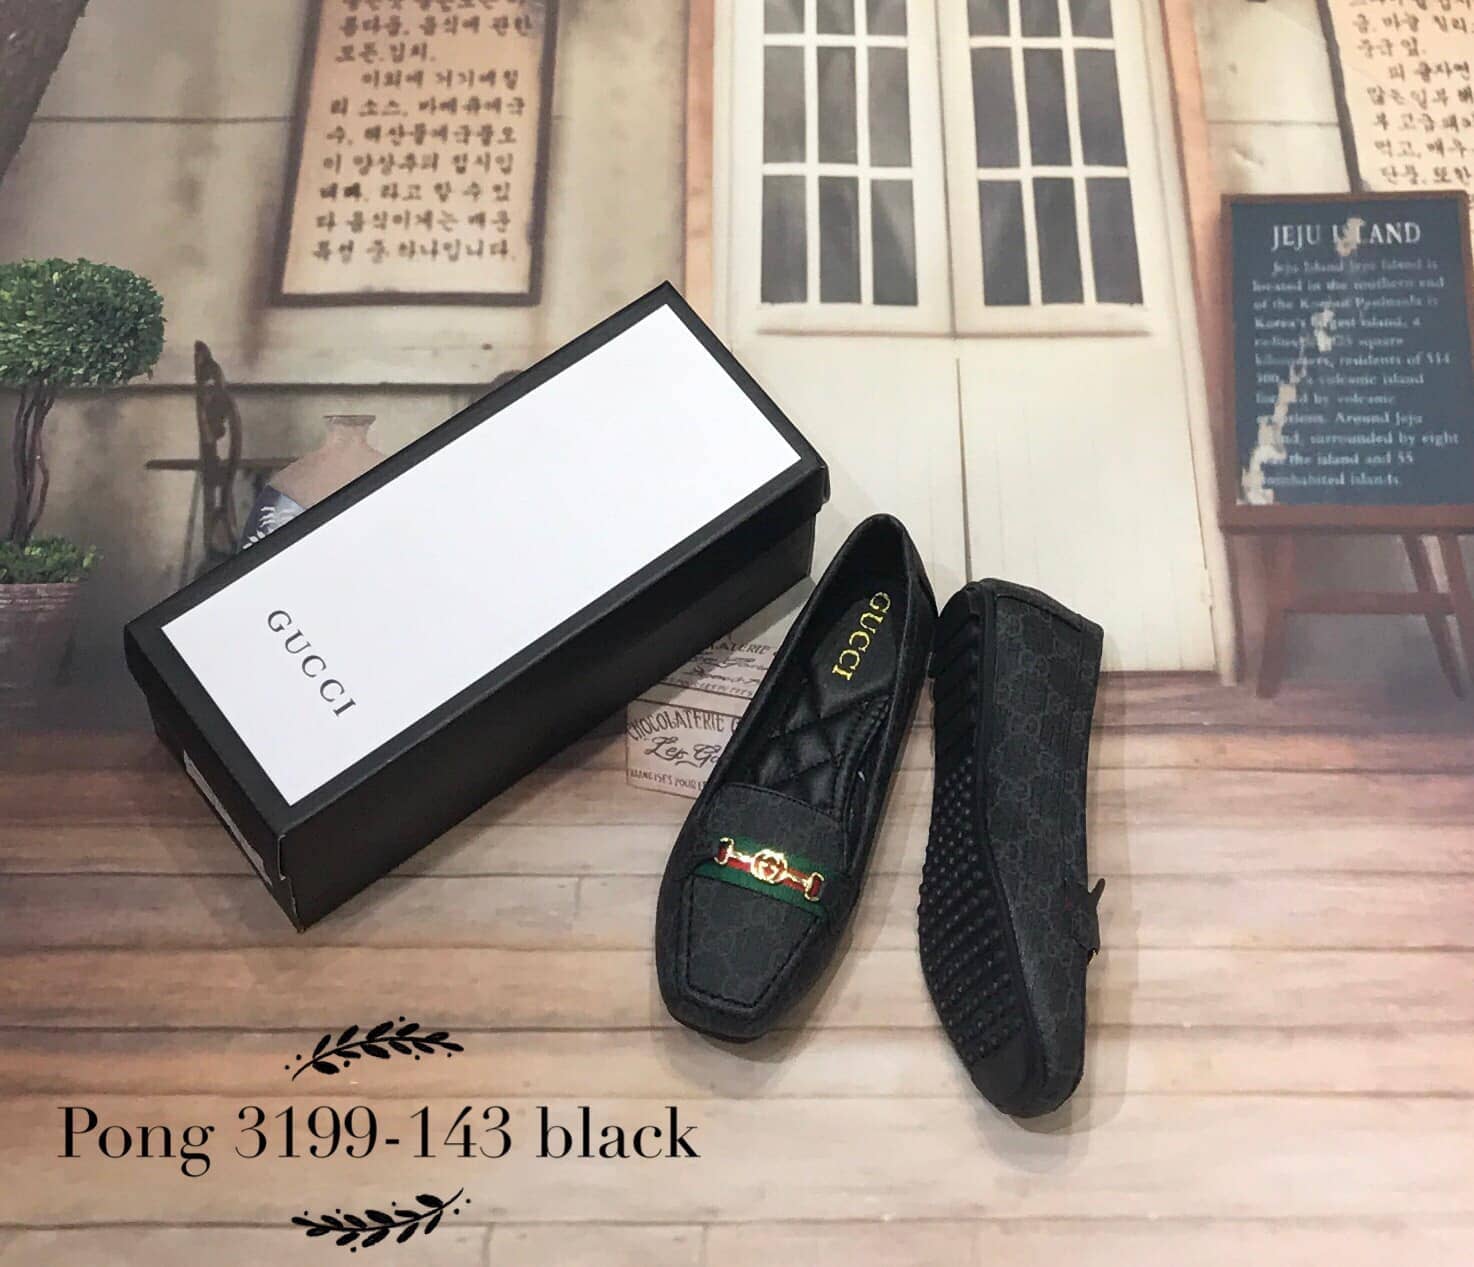 GG3199-143 Casual Loafer Shoes StyleMoto 